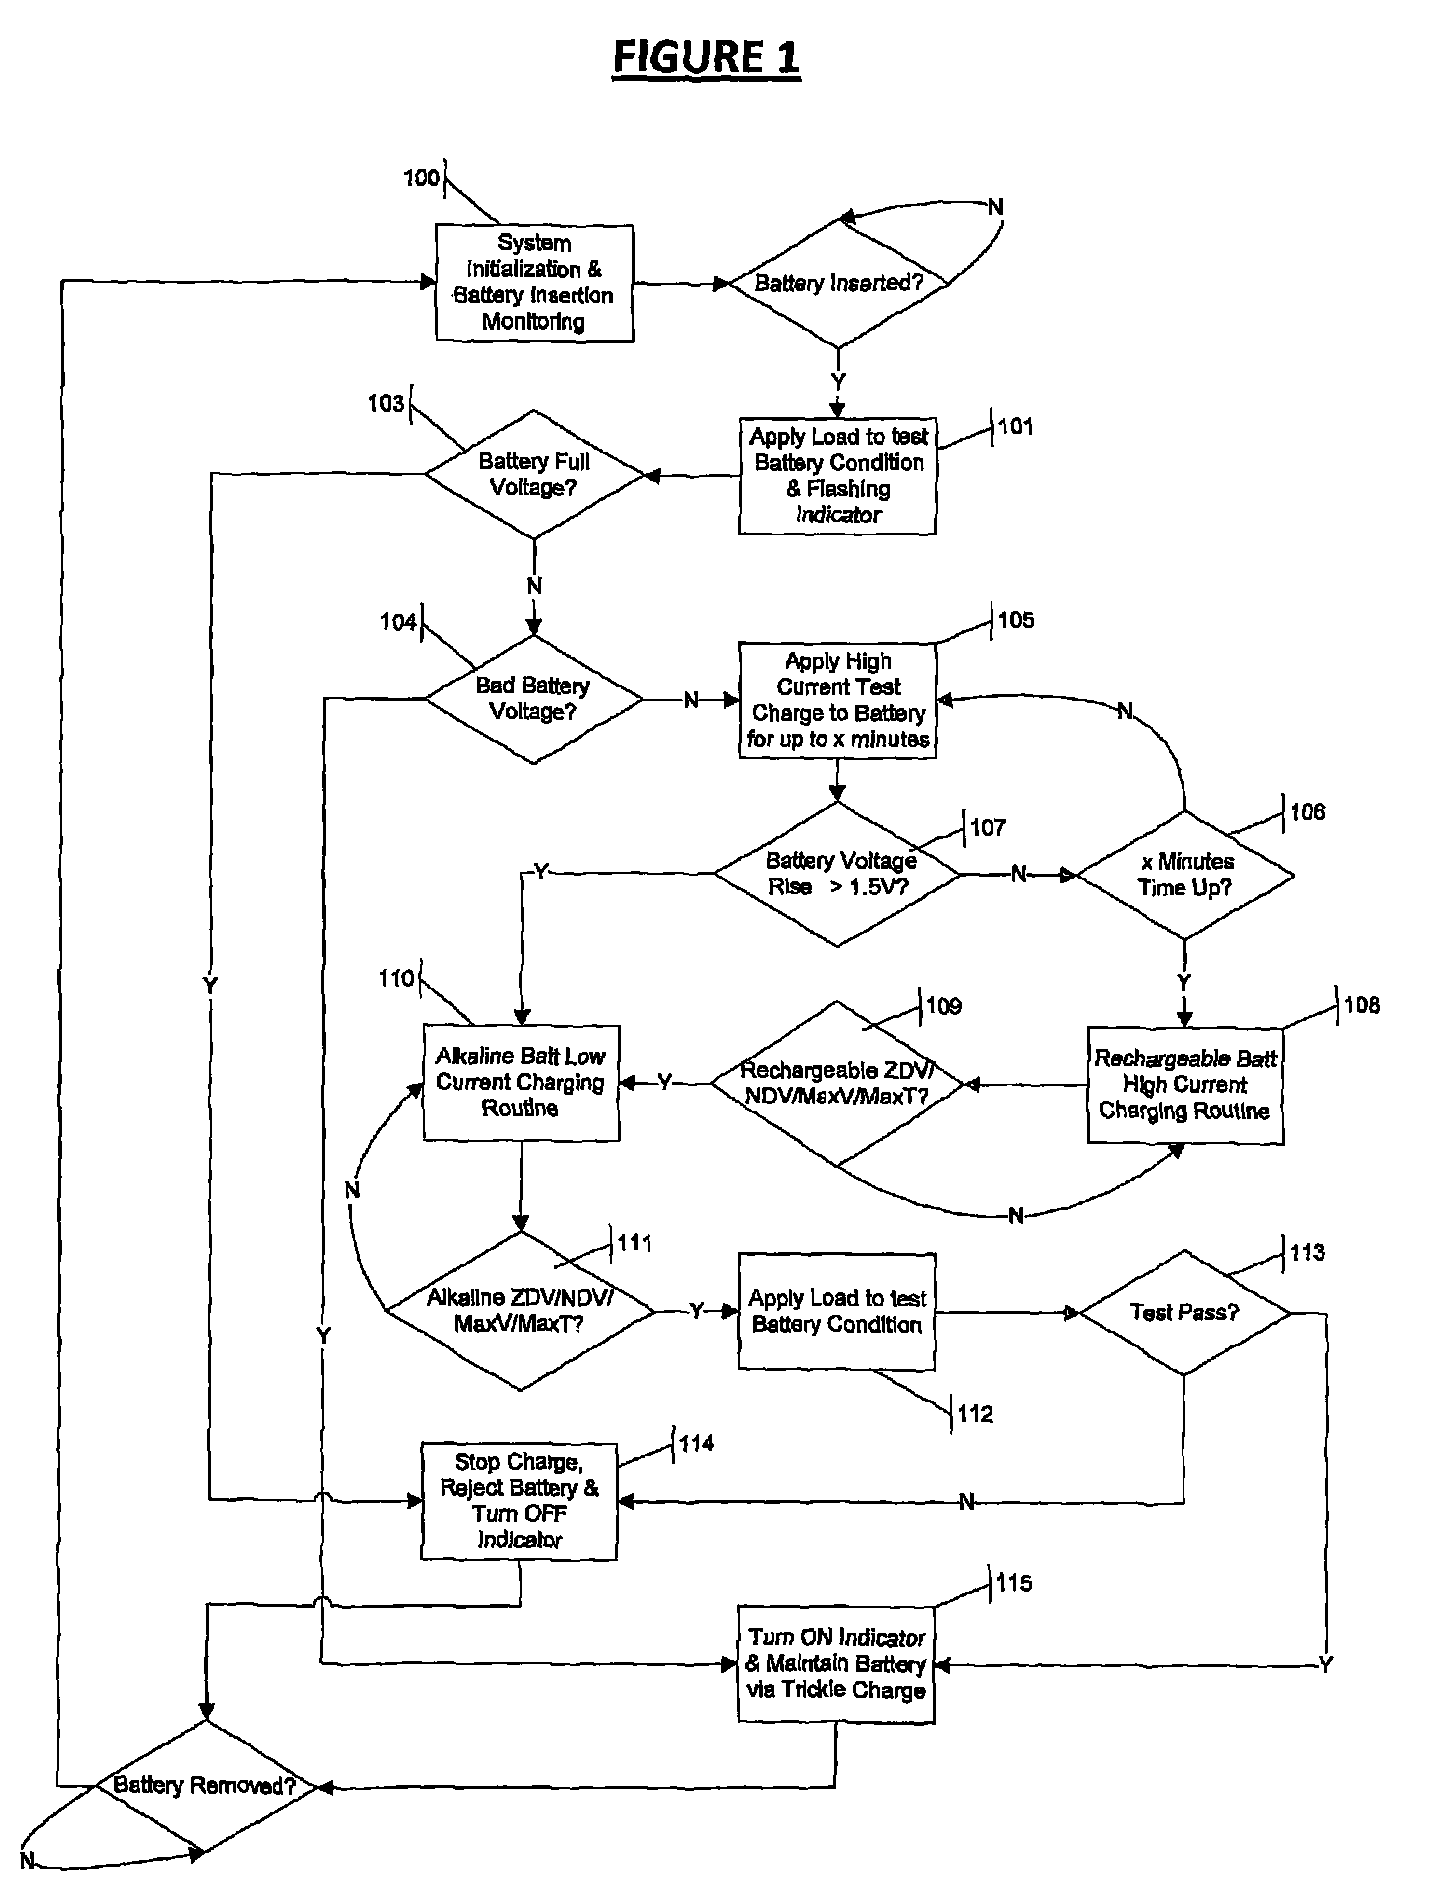 Multi-chemistry battery charging system and method of identifying and improved charging technique for primary and secondary dry-cell batteries